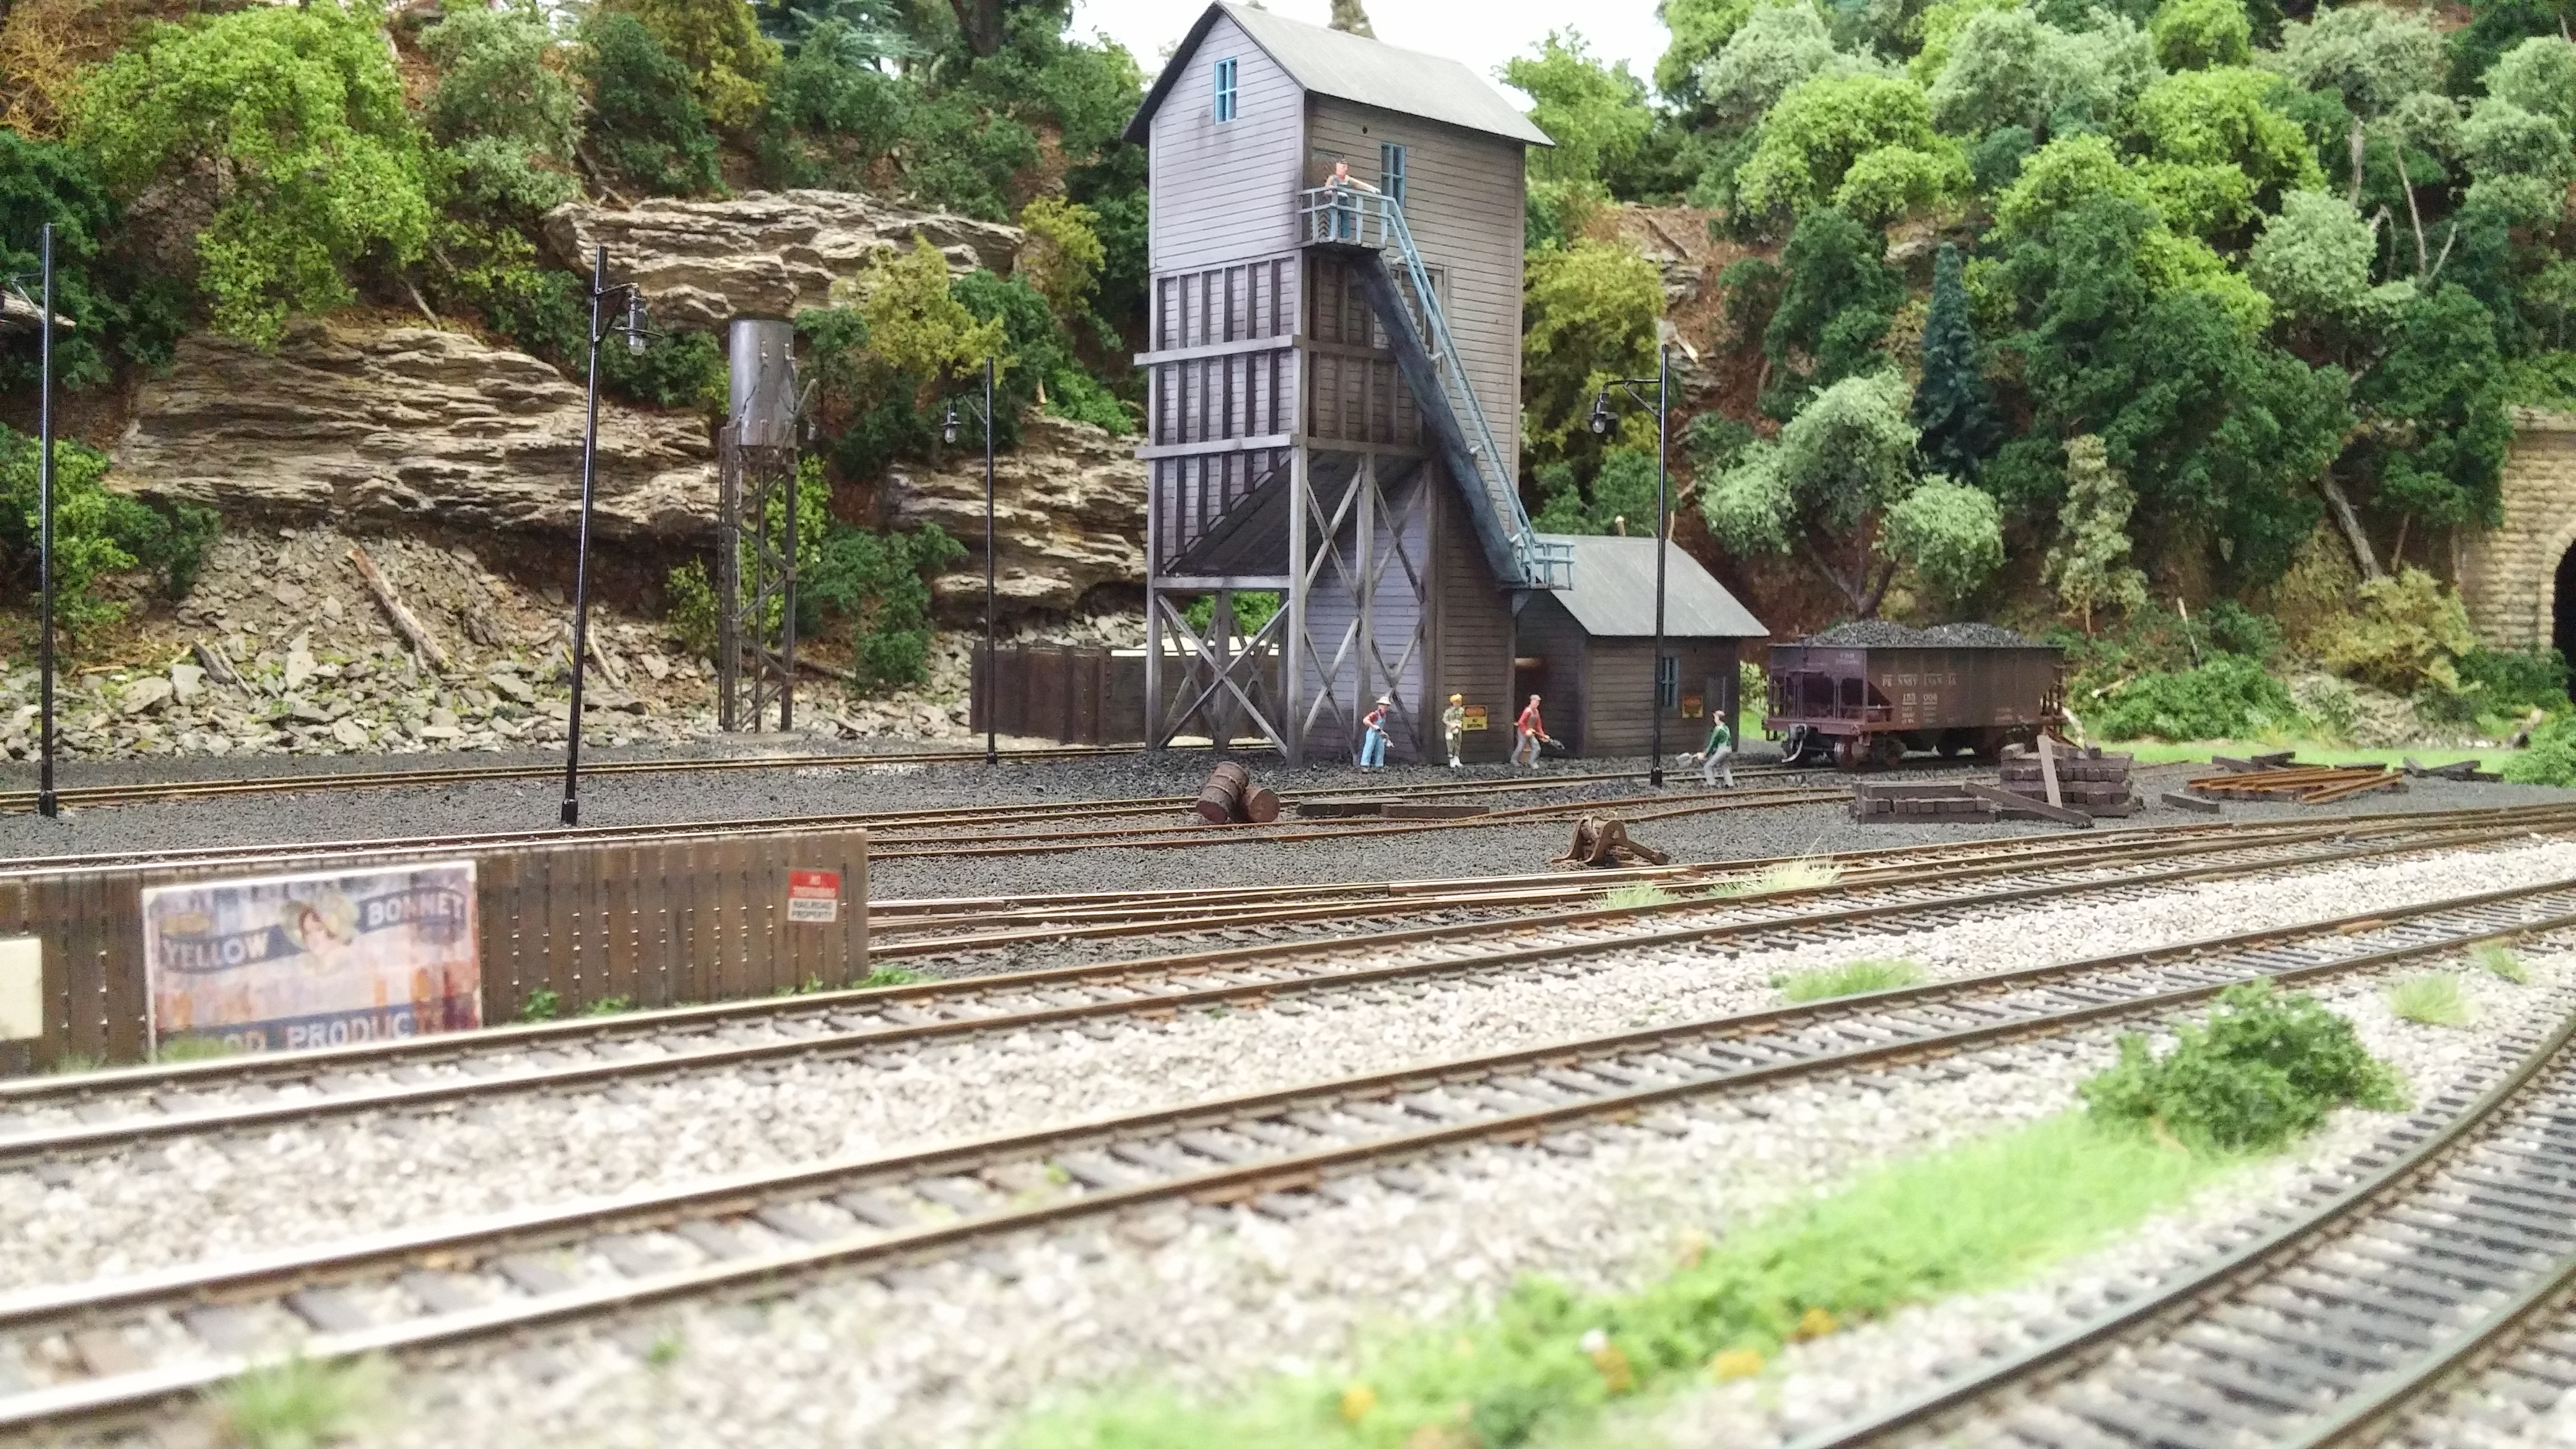 8th Annual Holiday Model Railroad Open House